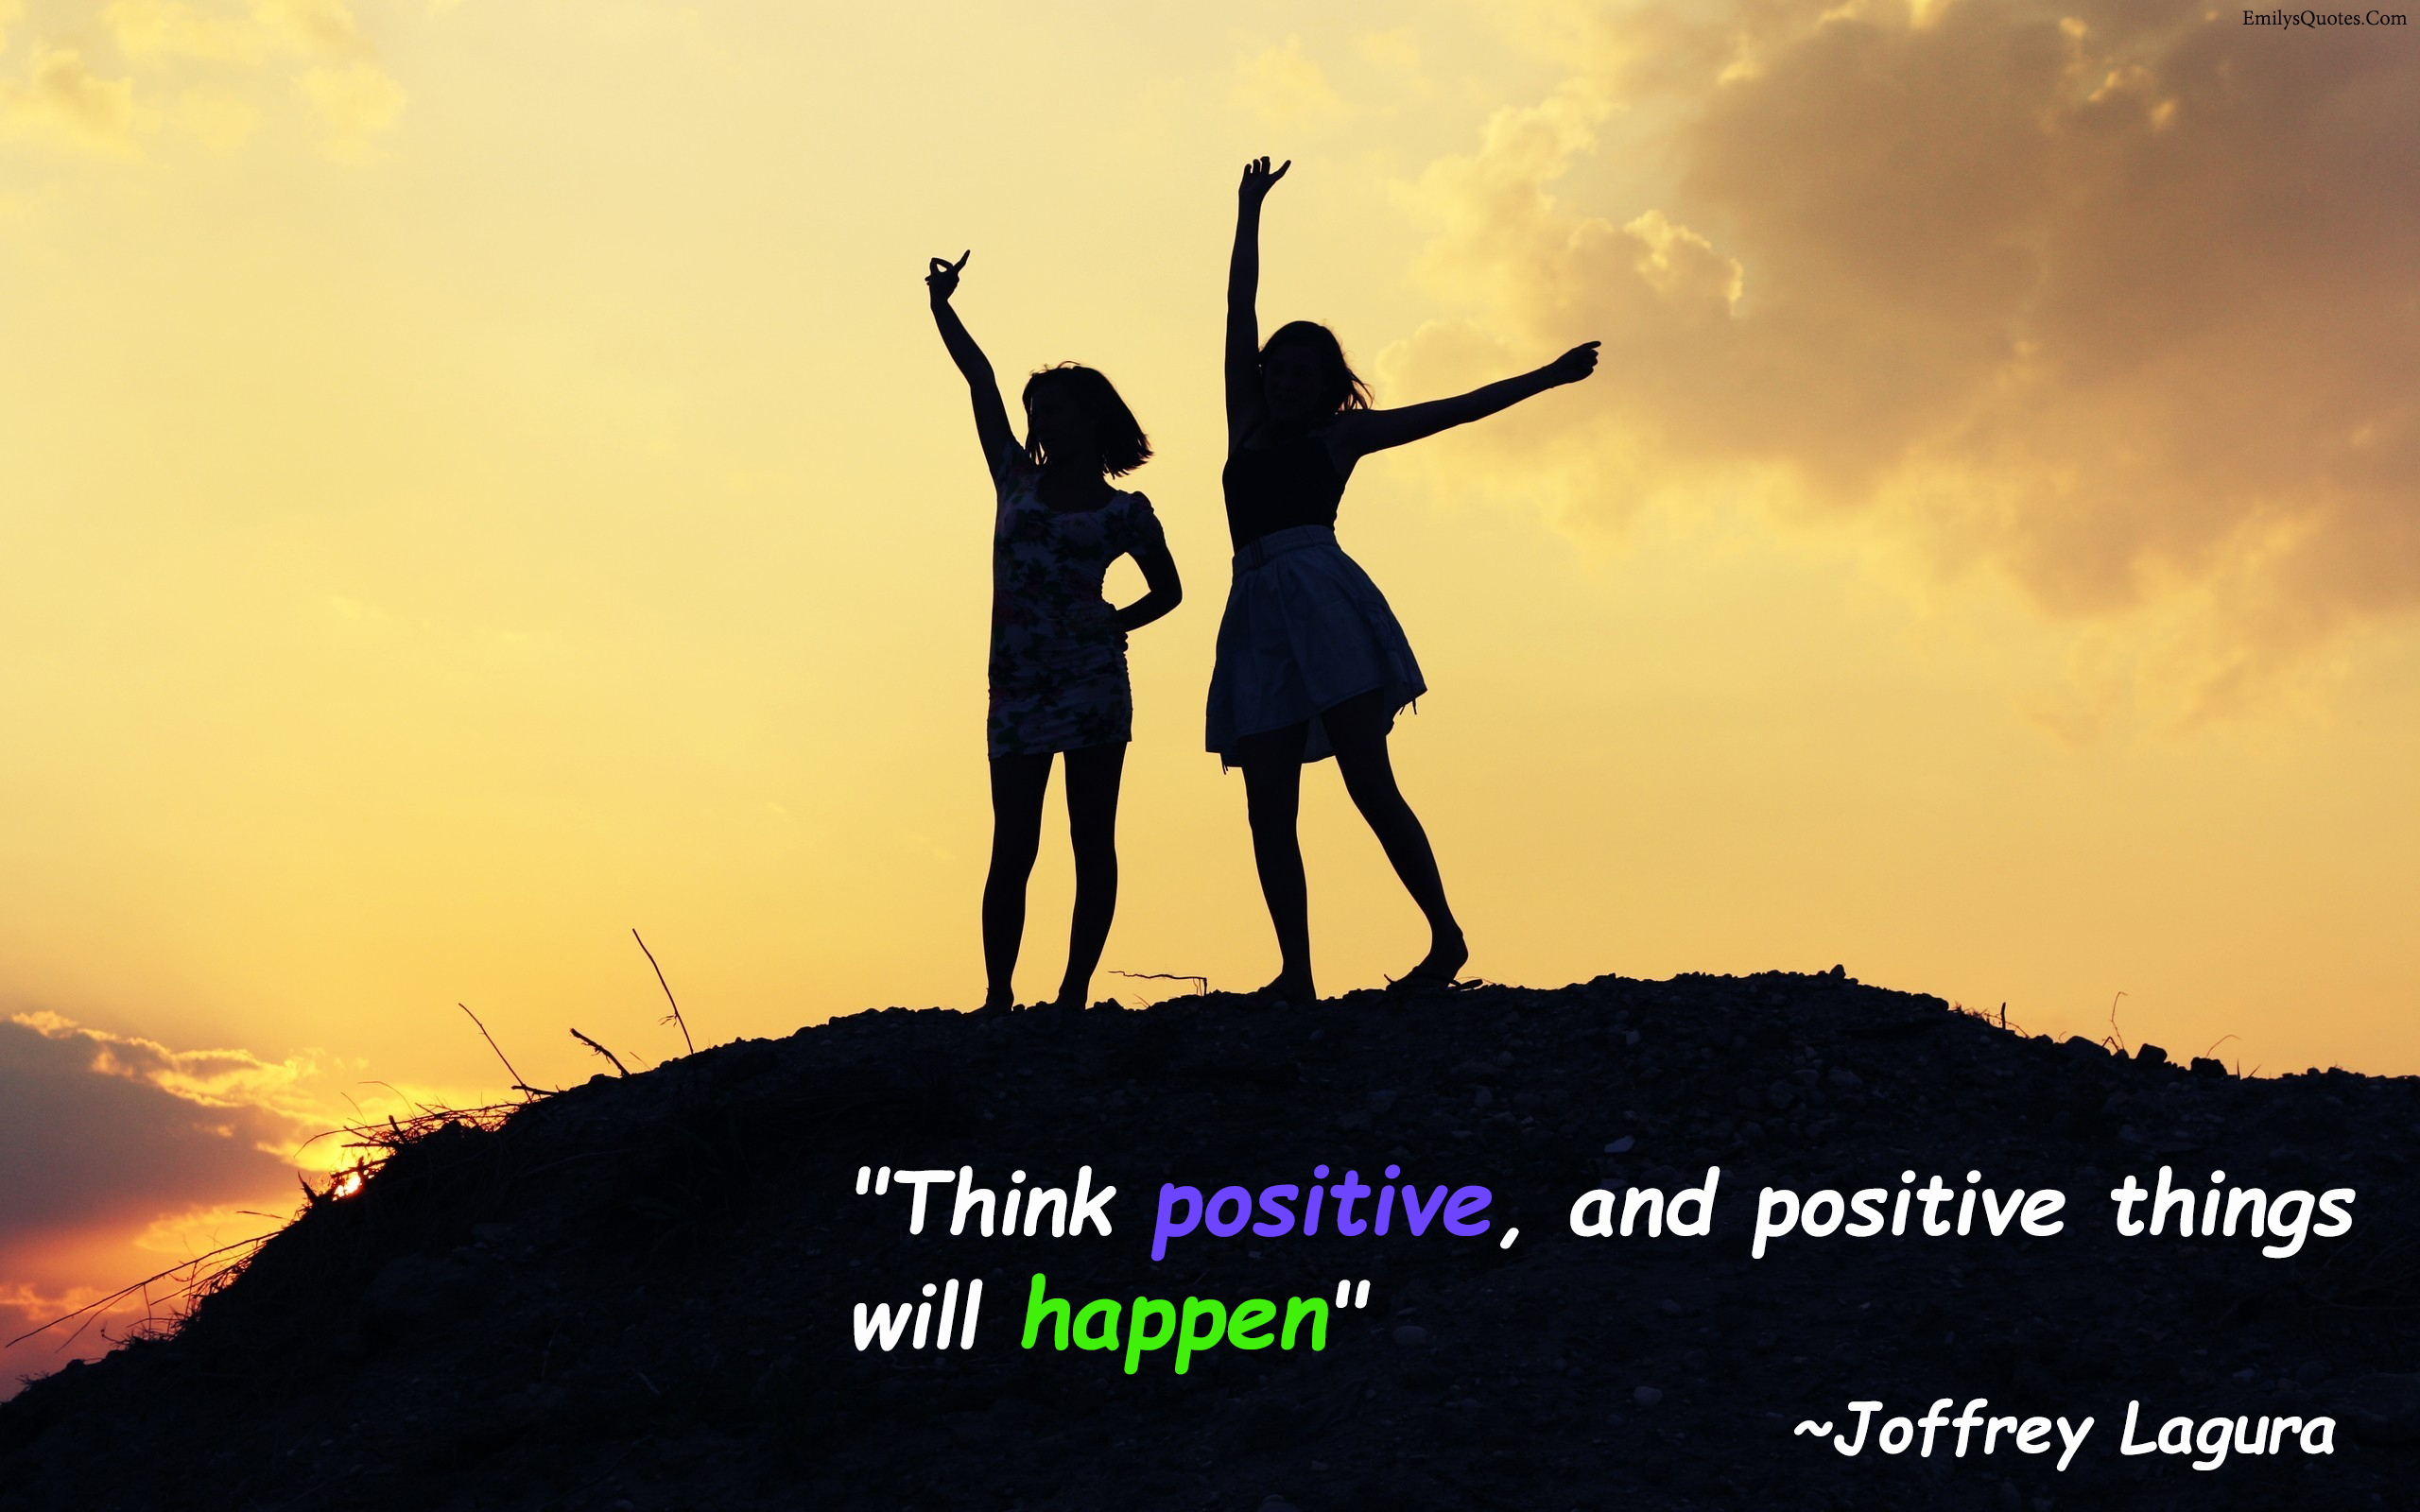 Think positive, and positive things will happen